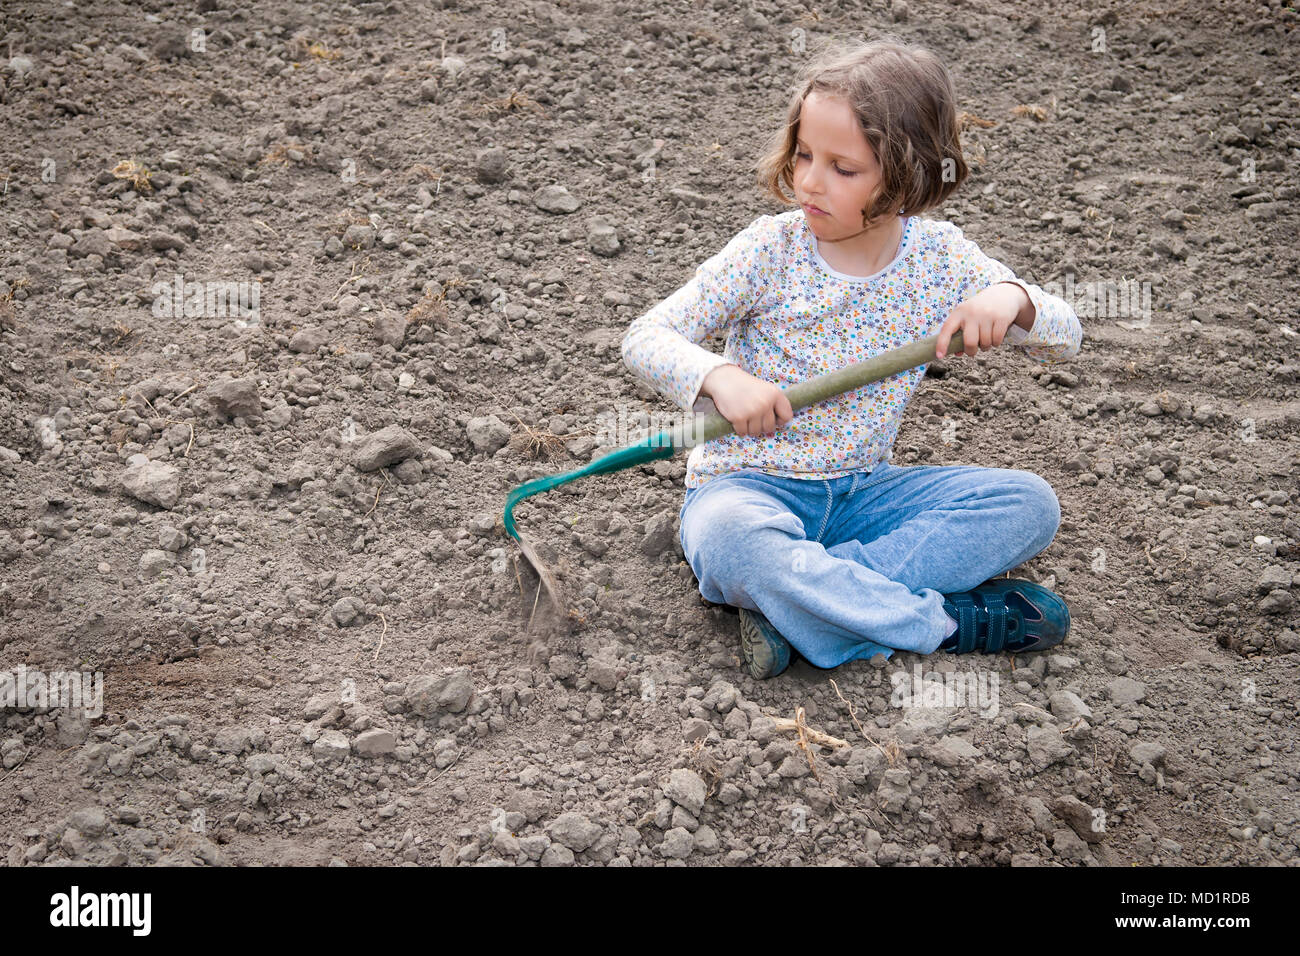 Girl digging in dry organic soil by hoe. Stock Photo